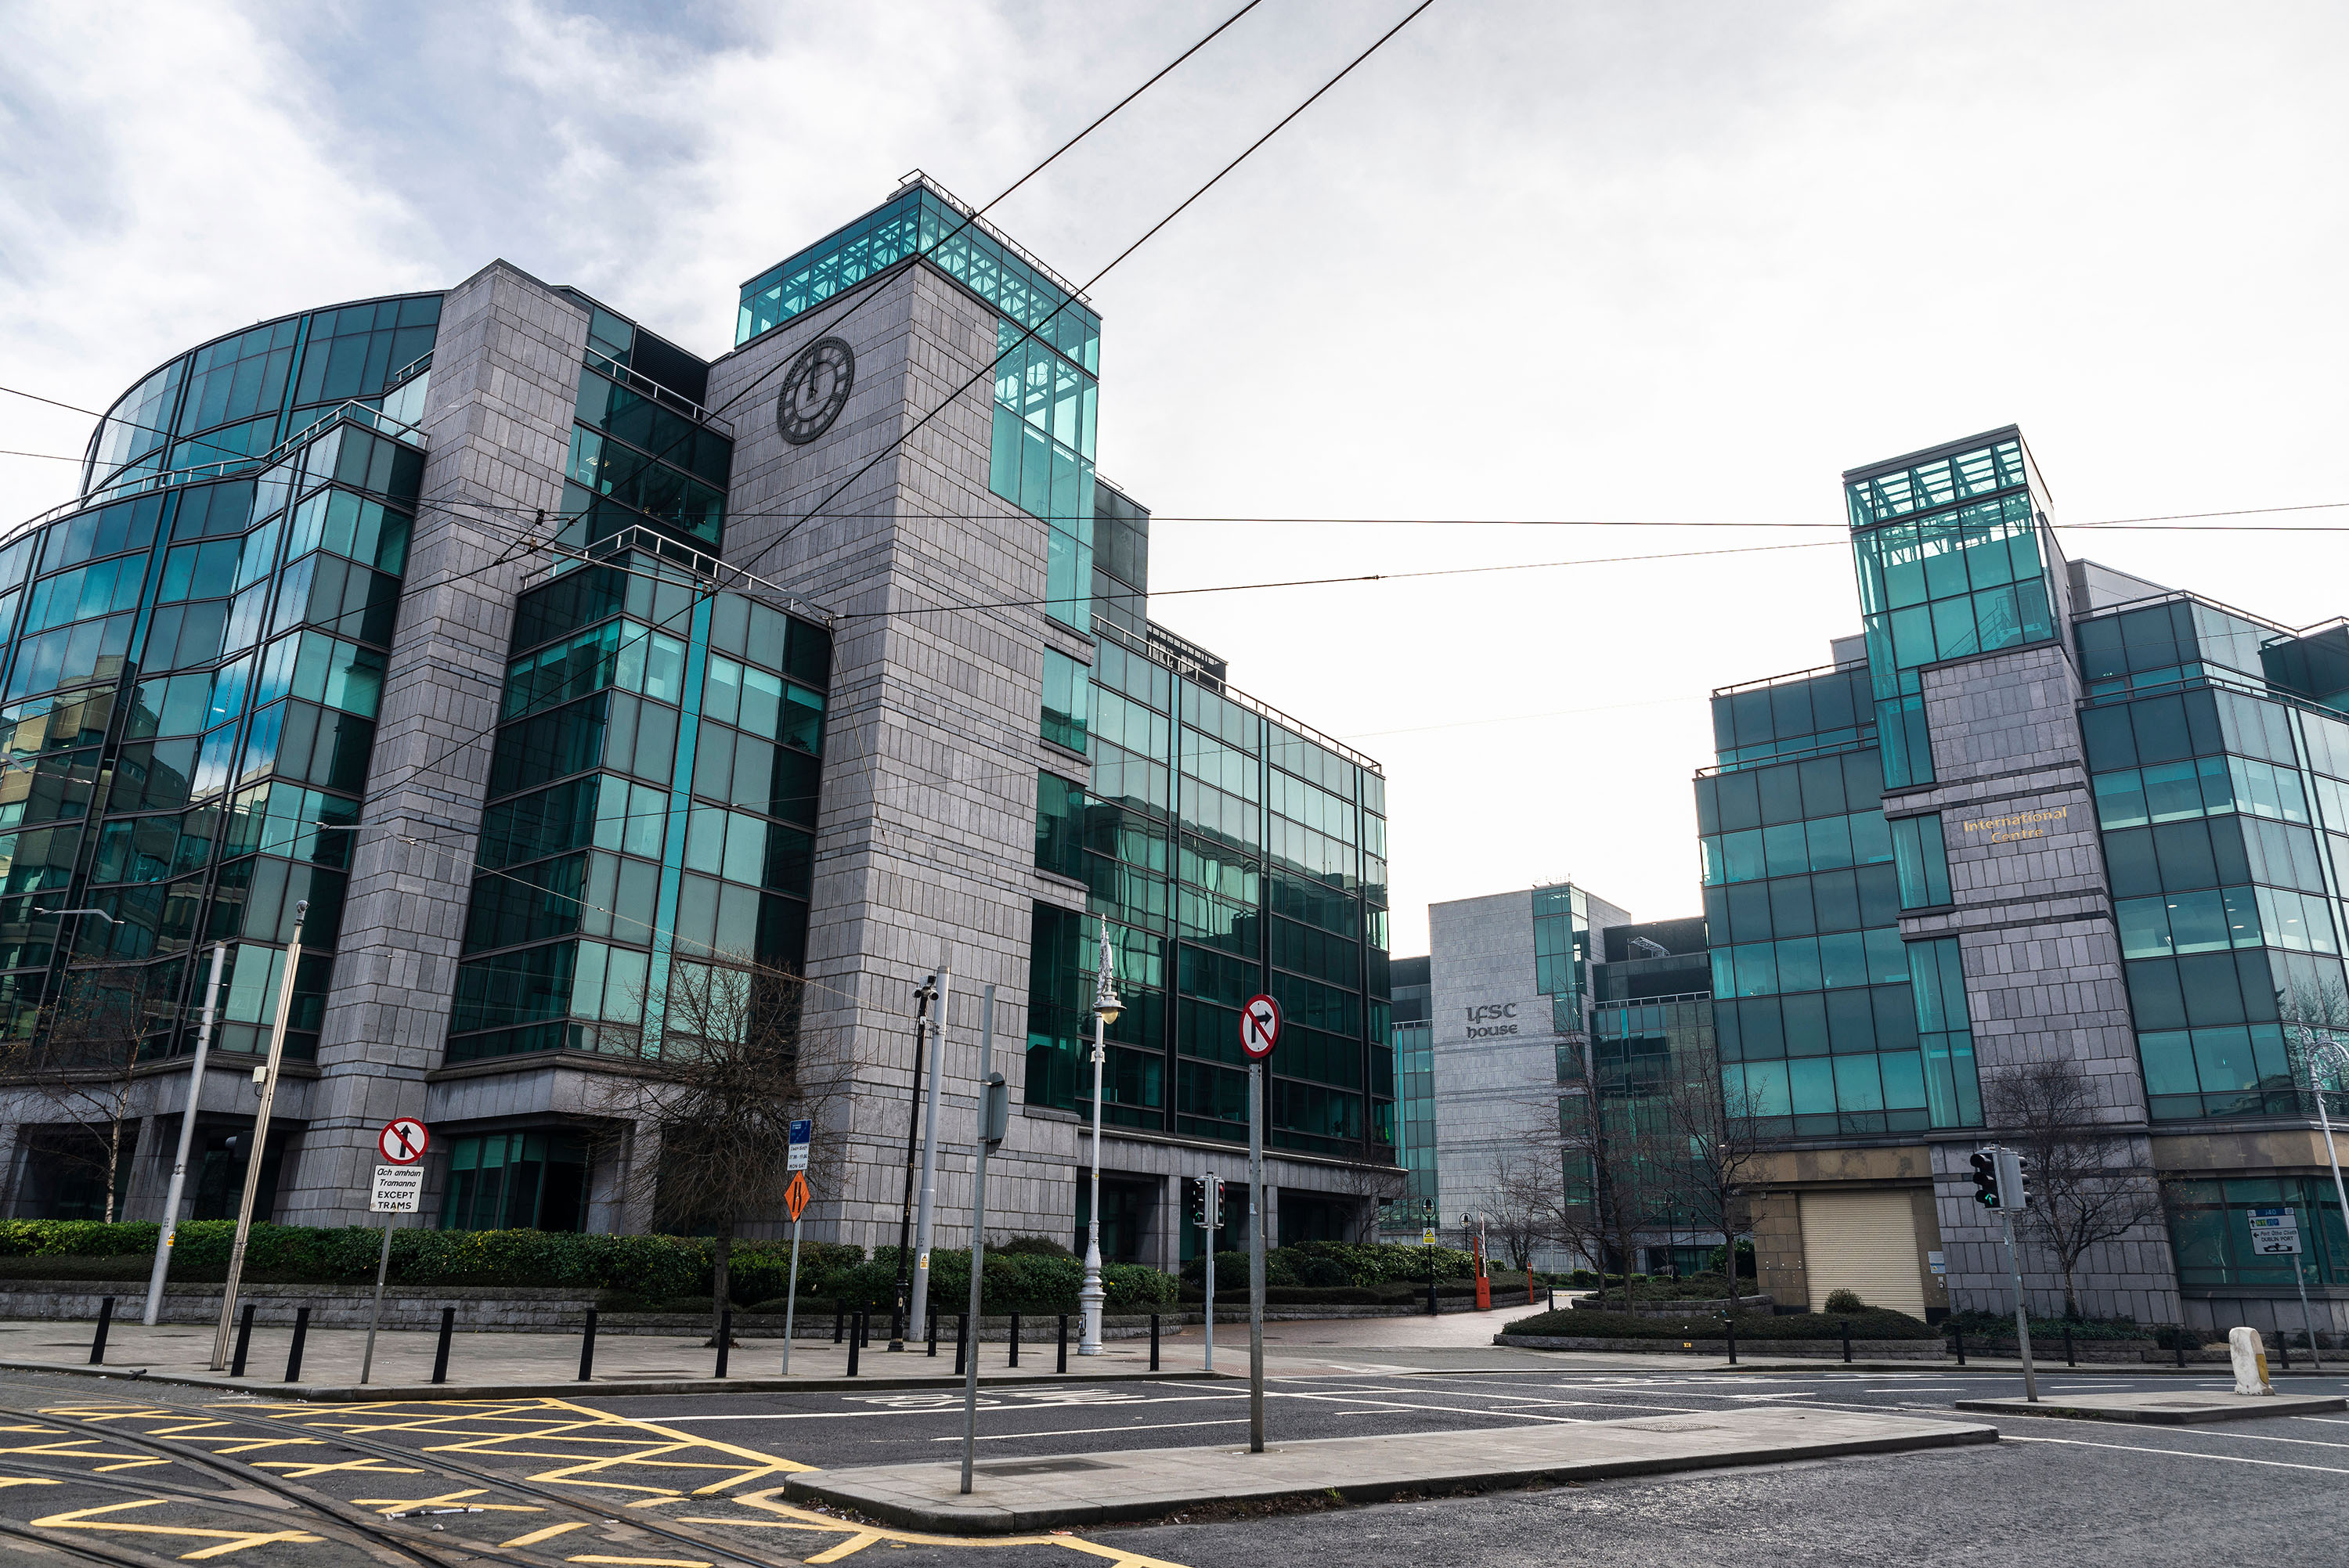 Growing Irish sector faces familiar challenges